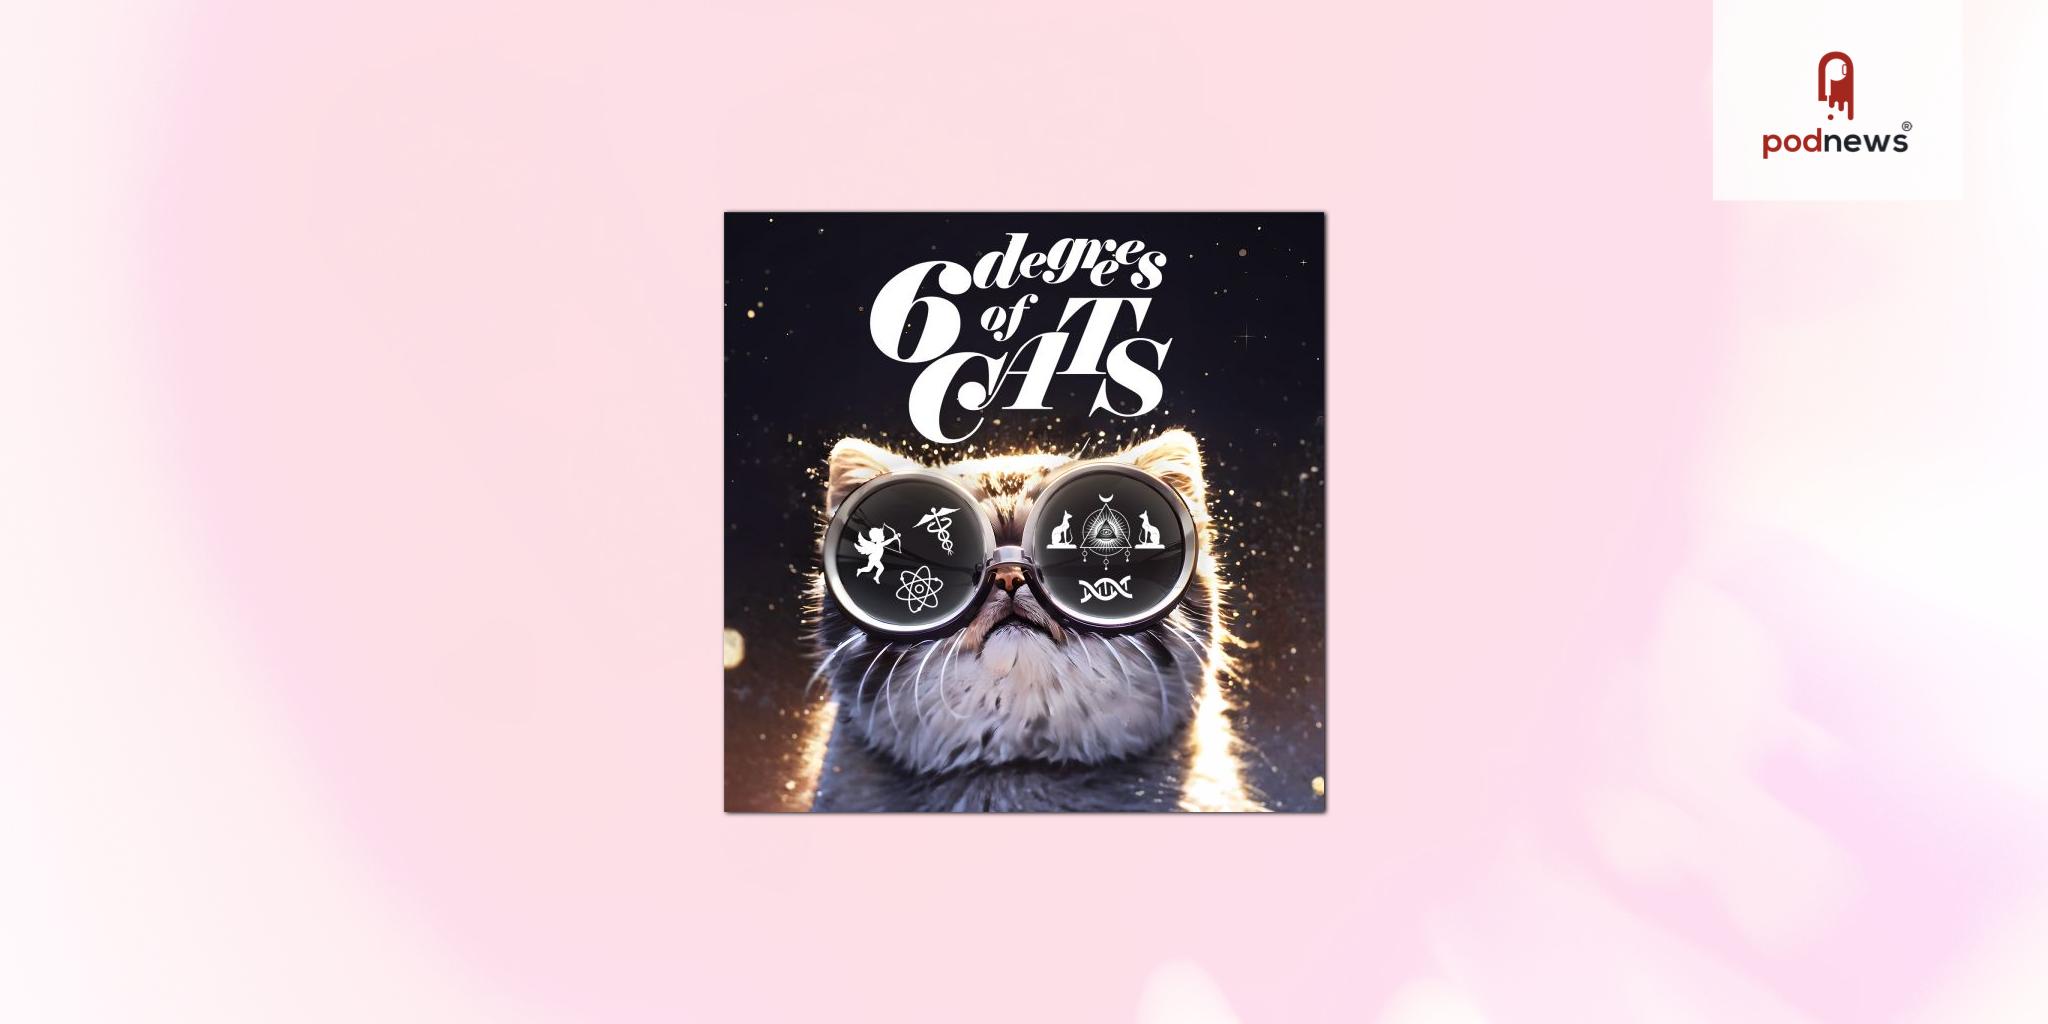 Spotify Sound Up! USA alumni announces premiere of cat-themed history and culture podcast, 6 Degrees of Cats